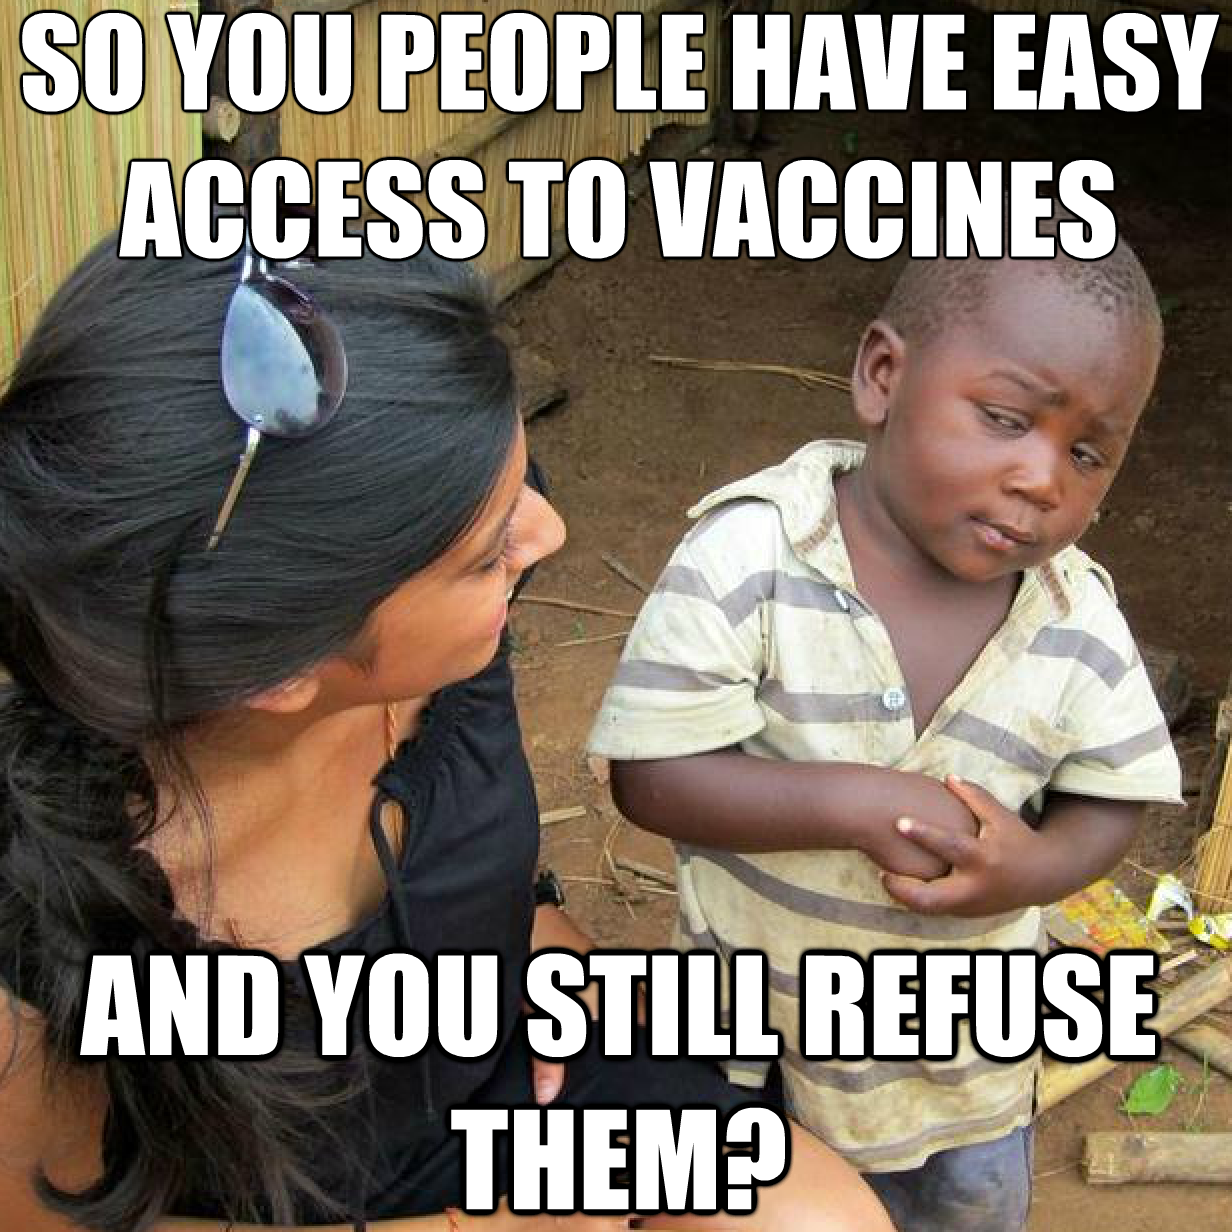 VaccineAfrican.png